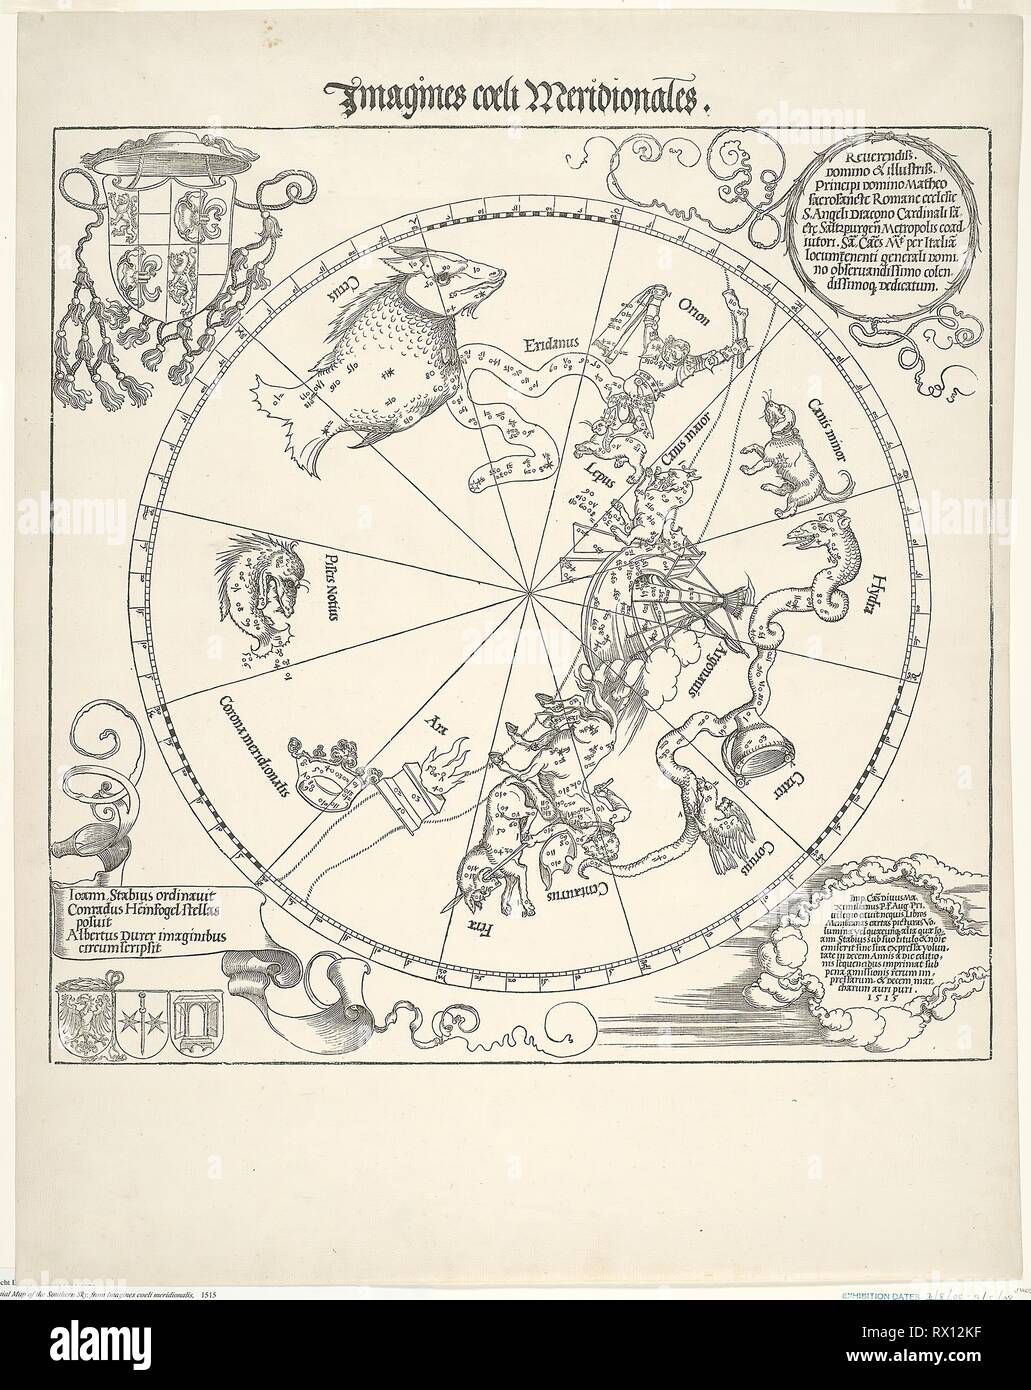 Celestial Map of the Southern Sky (Imagines coeli meridionalis). Albrecht Dürer; German, 1471-1528. Date: 1515. Dimensions: 431 x 433 mm (image); 585 x 463 mm (sheet). Woodcut in black on ivory laid paper. Origin: Germany. Museum: The Chicago Art Institute. Stock Photo